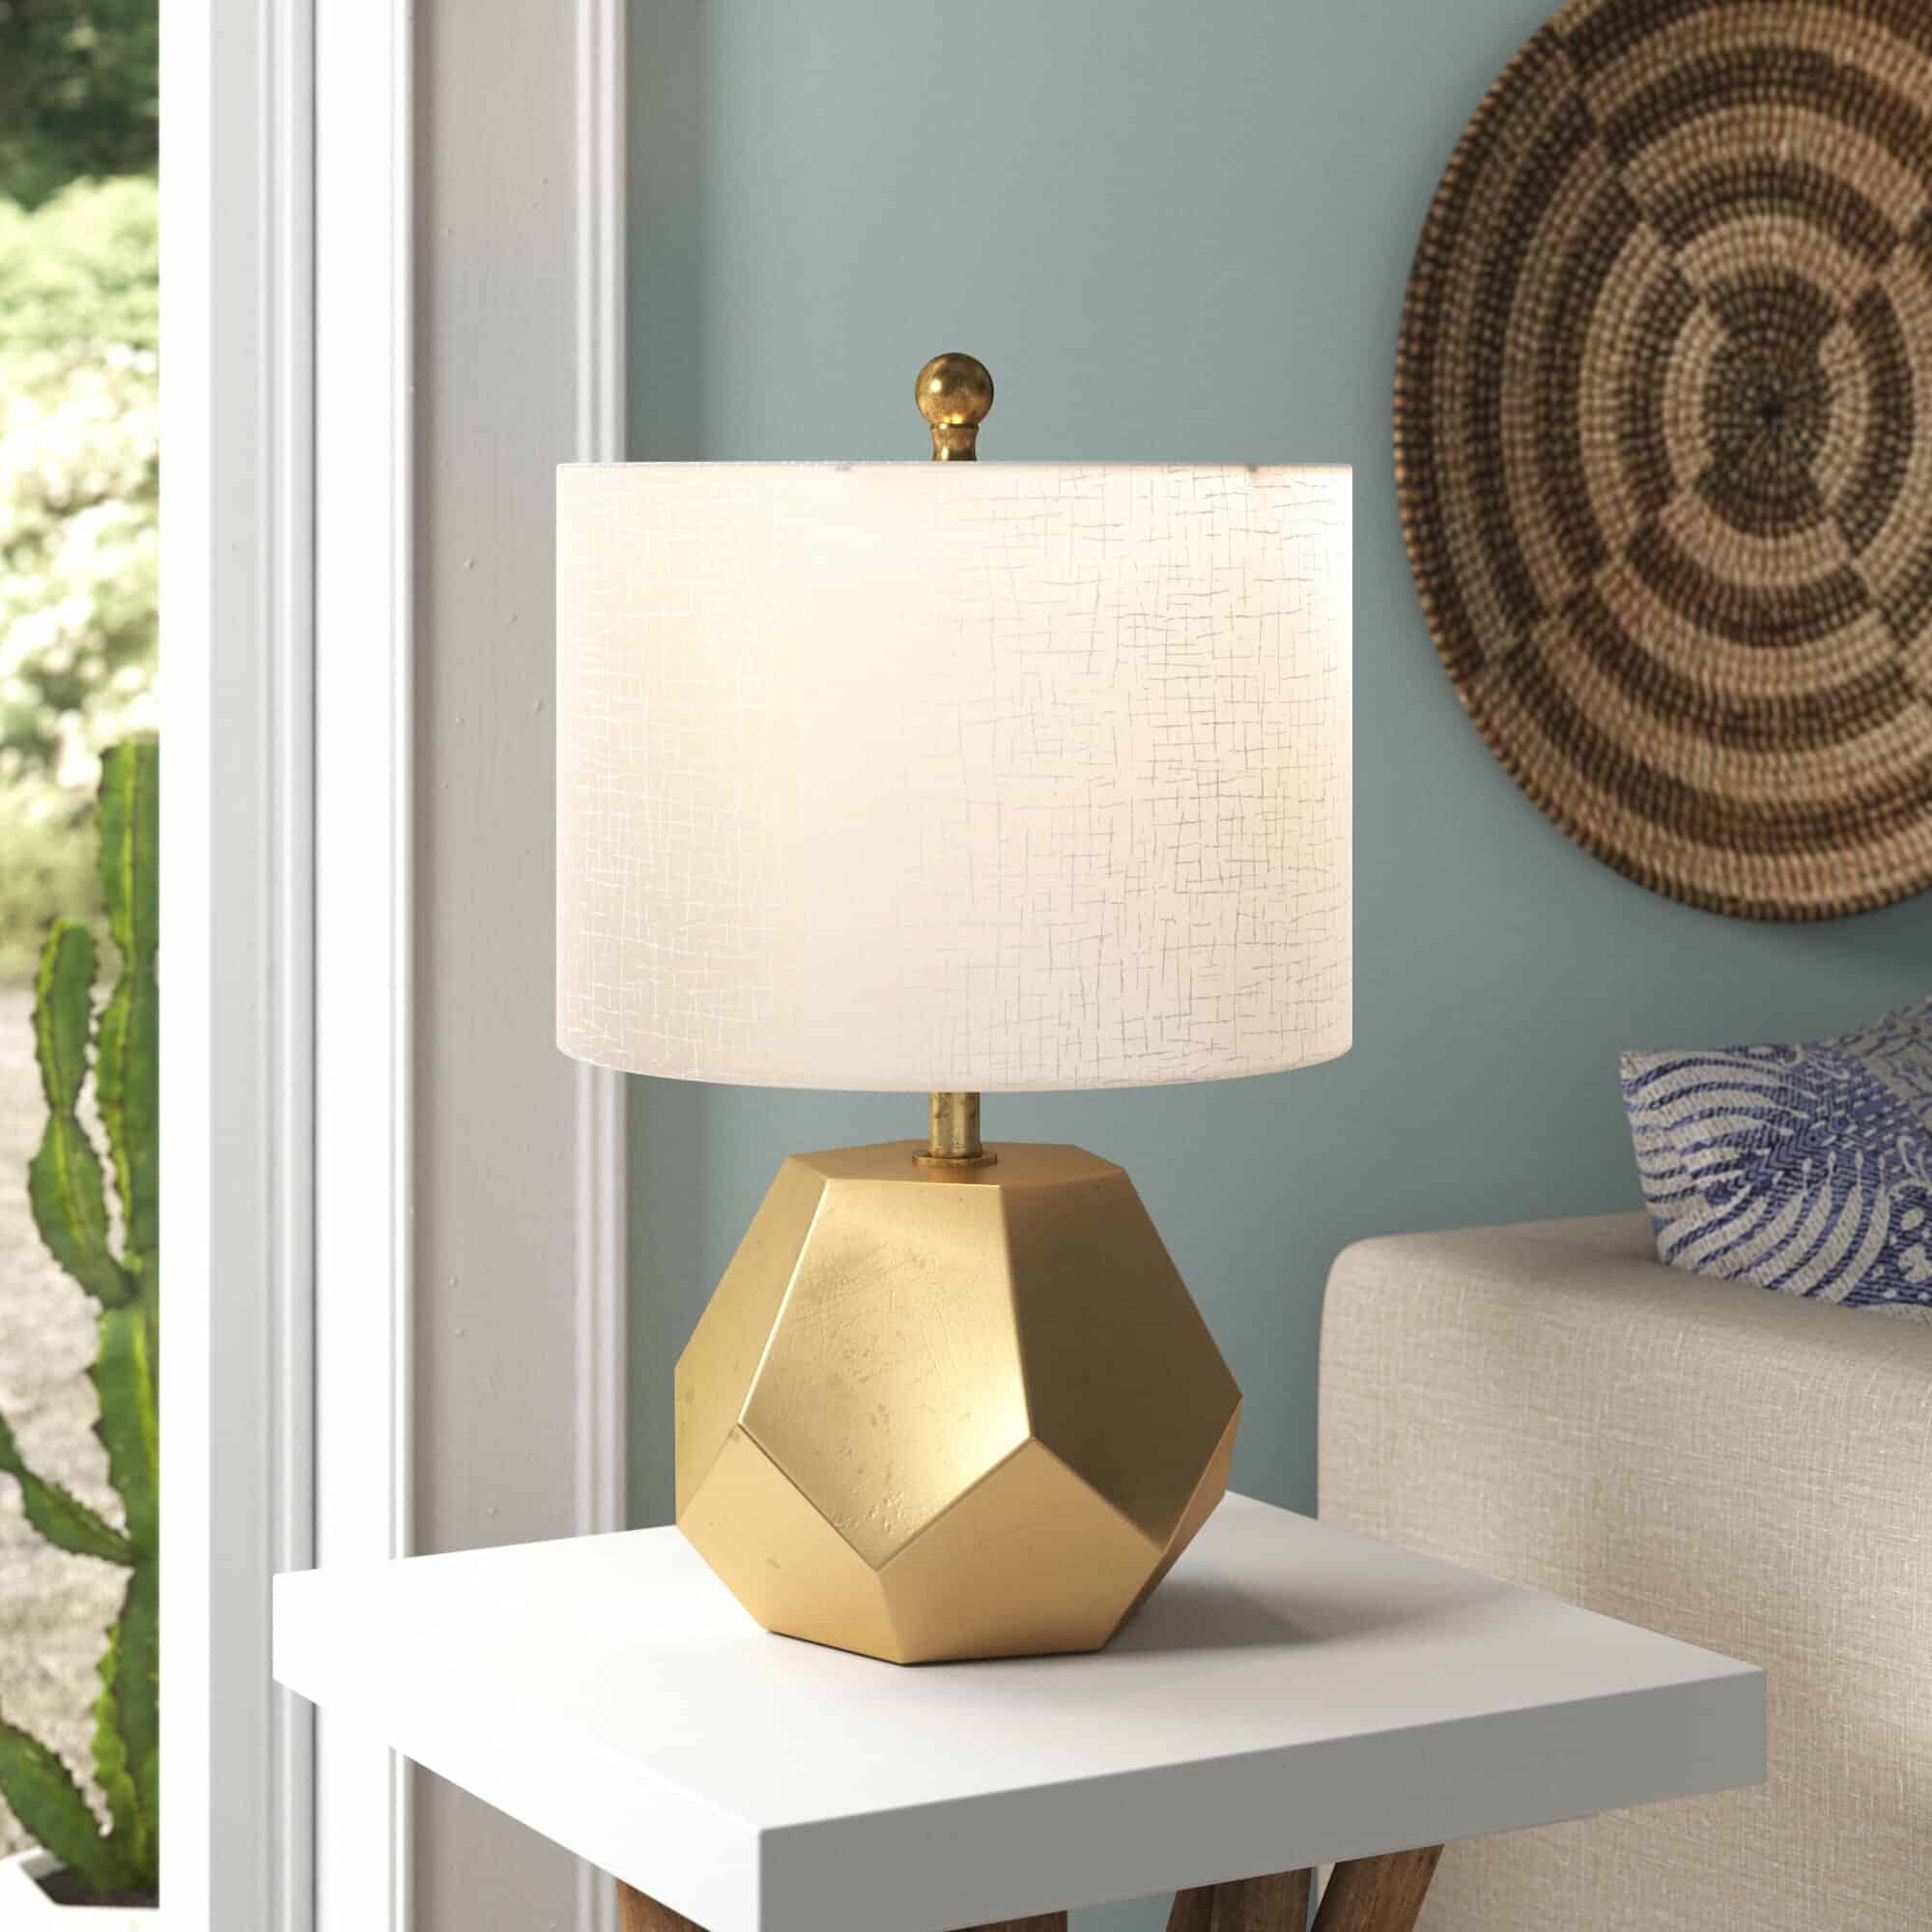 A Geometric White And Gold Lamp Will Bring A Modern Edge Into Your Bedroom